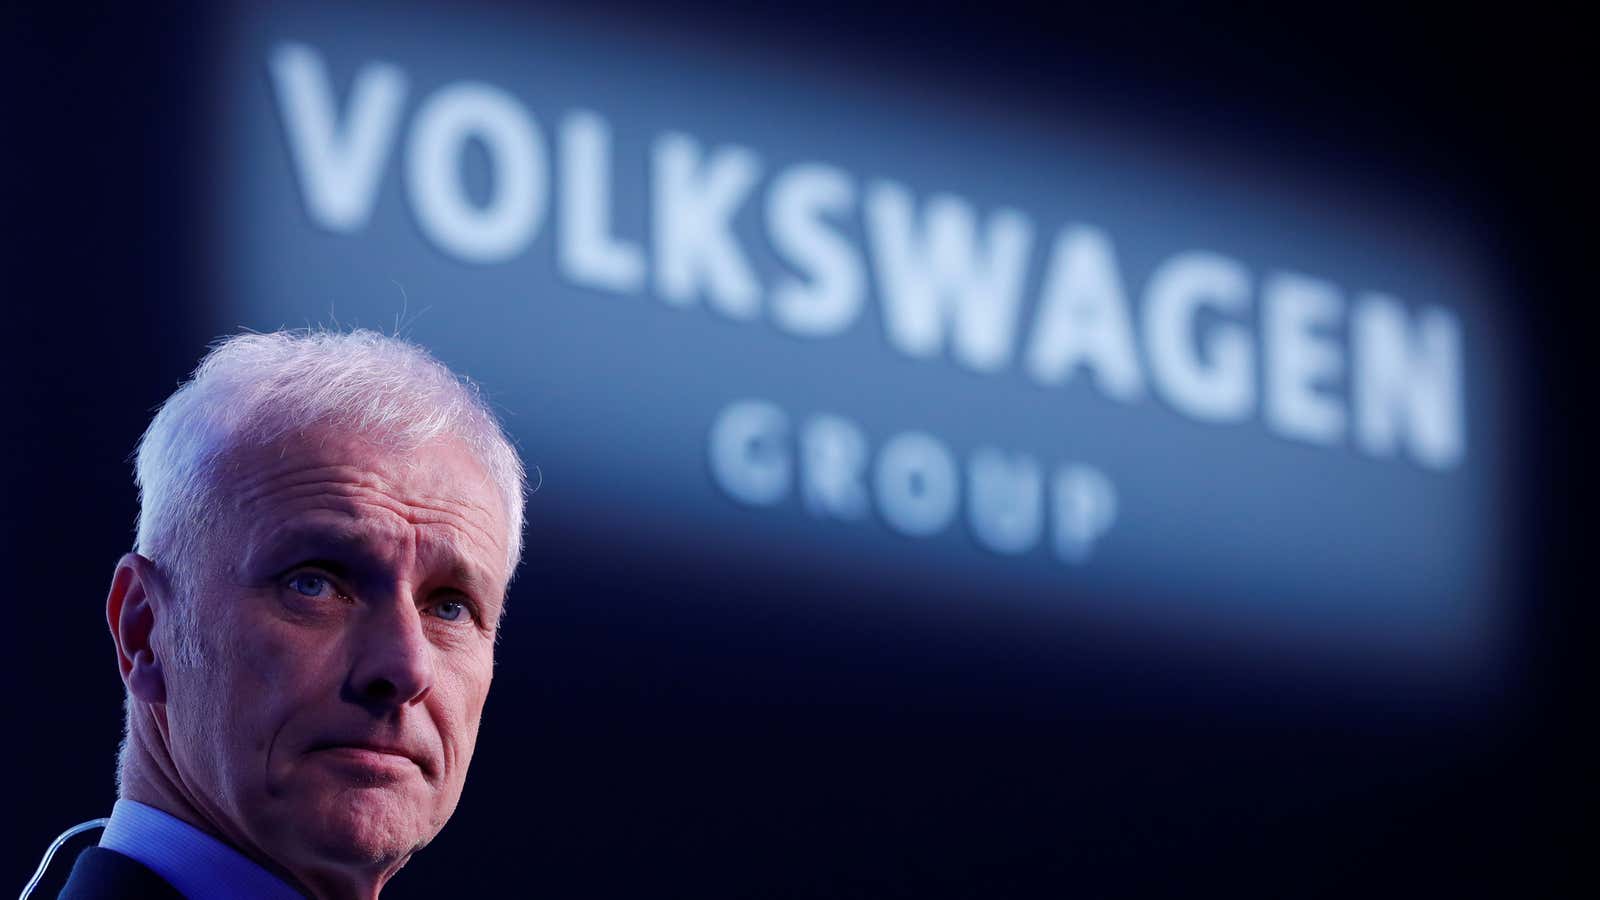 End of the road at VW?